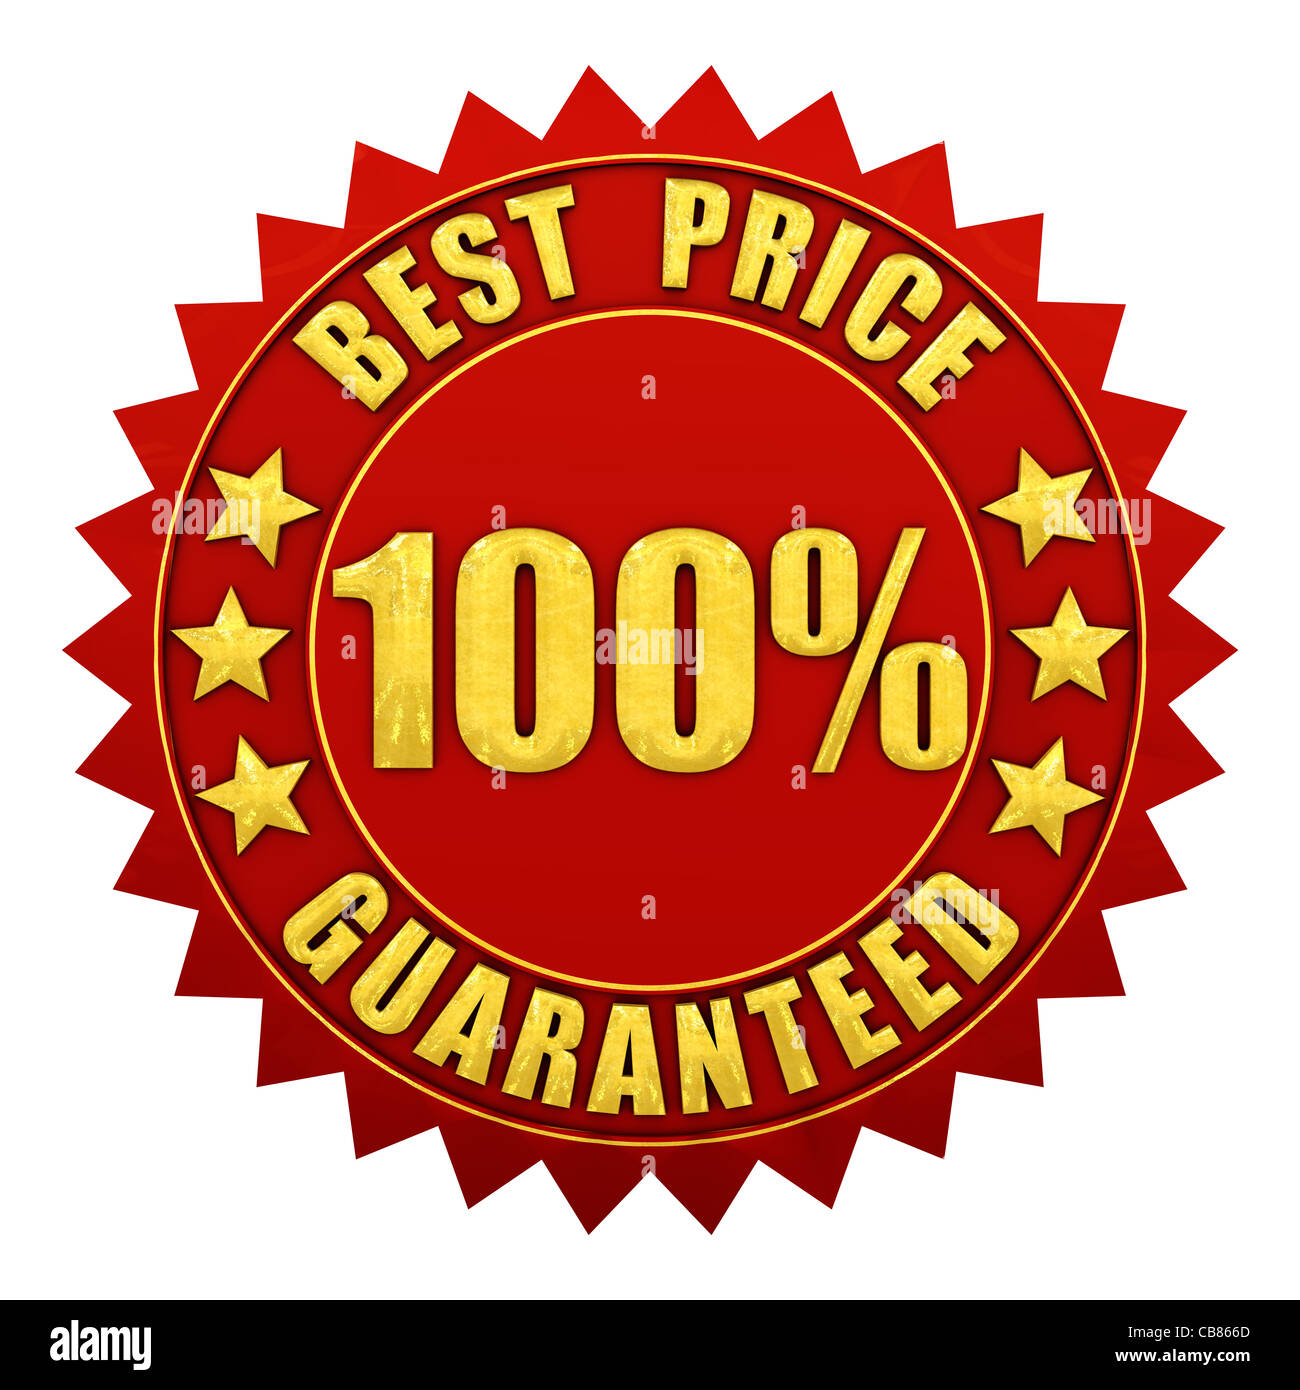 13,041 Best Deals Guaranteed Royalty-Free Images, Stock Photos